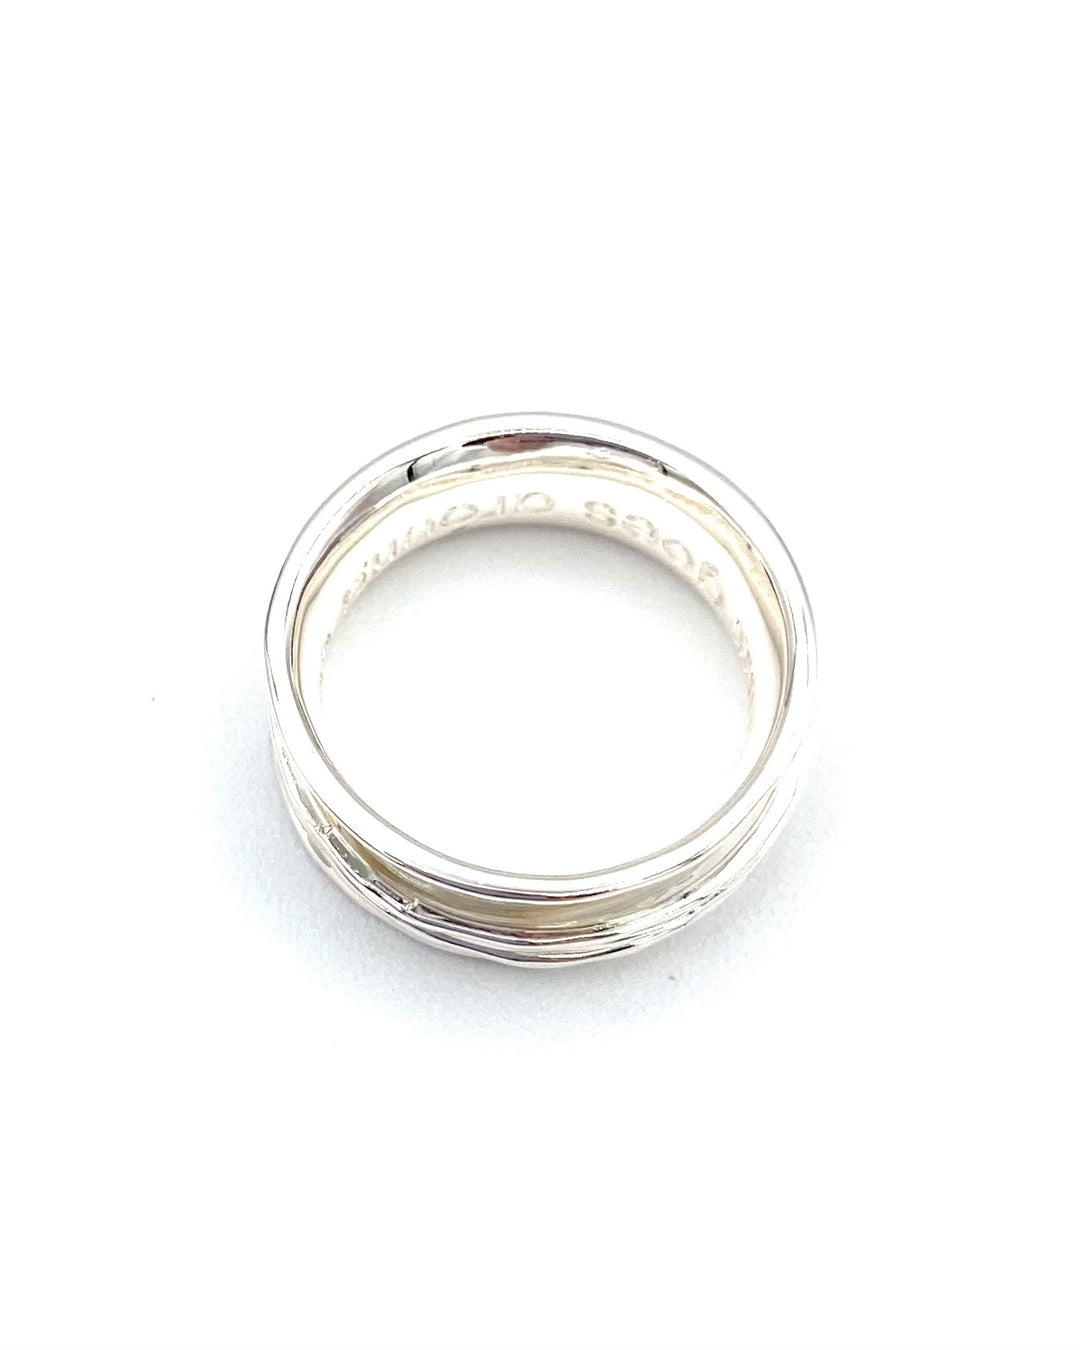 Silver Pleated Ring - Size 8